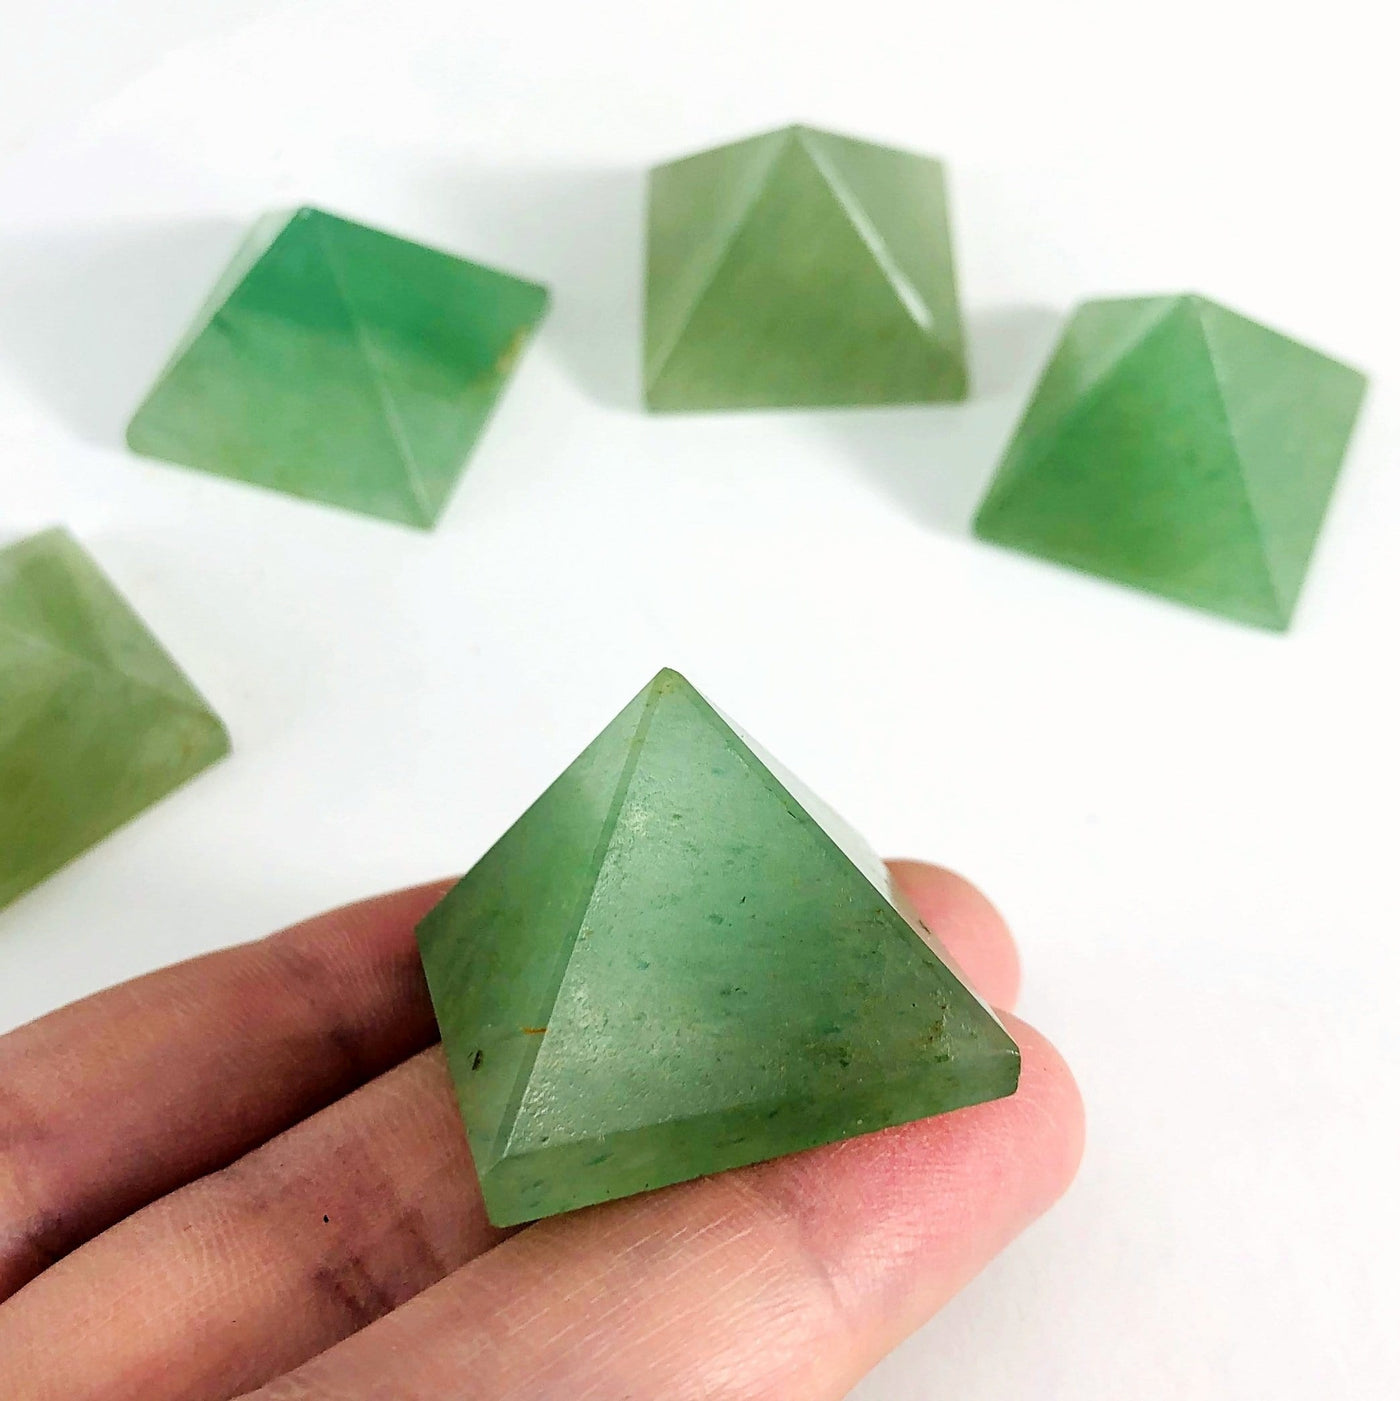 Green Aventurine Pyramid in a hand viewed from a side view